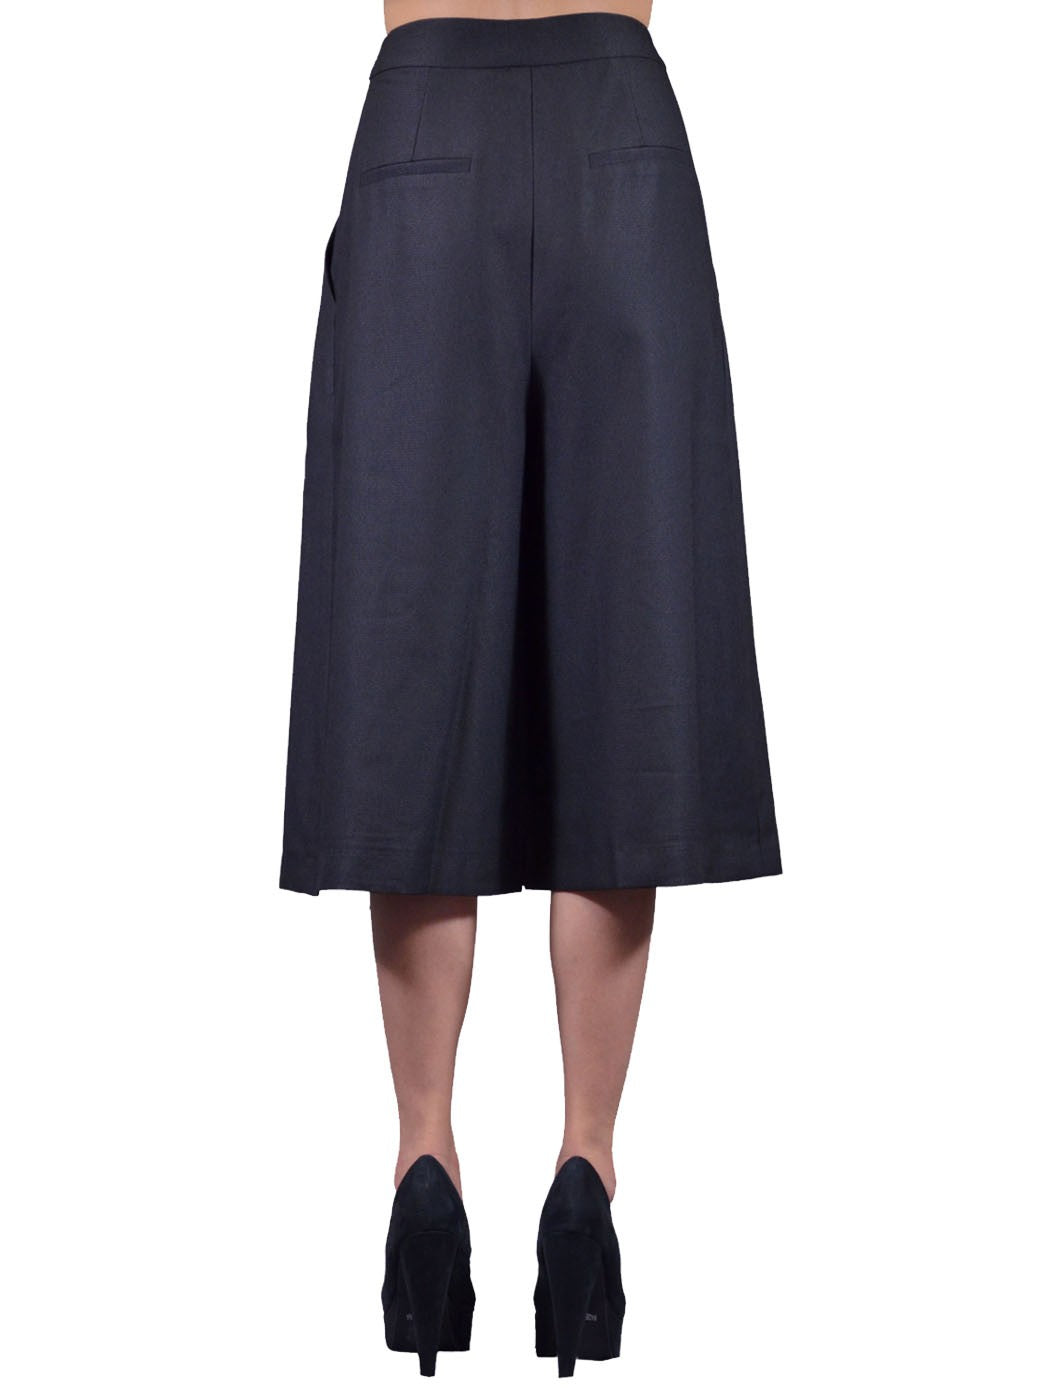 Lush Lady Chic Structured Pleated Midi Length Wide Legs Karate Pants Trousers